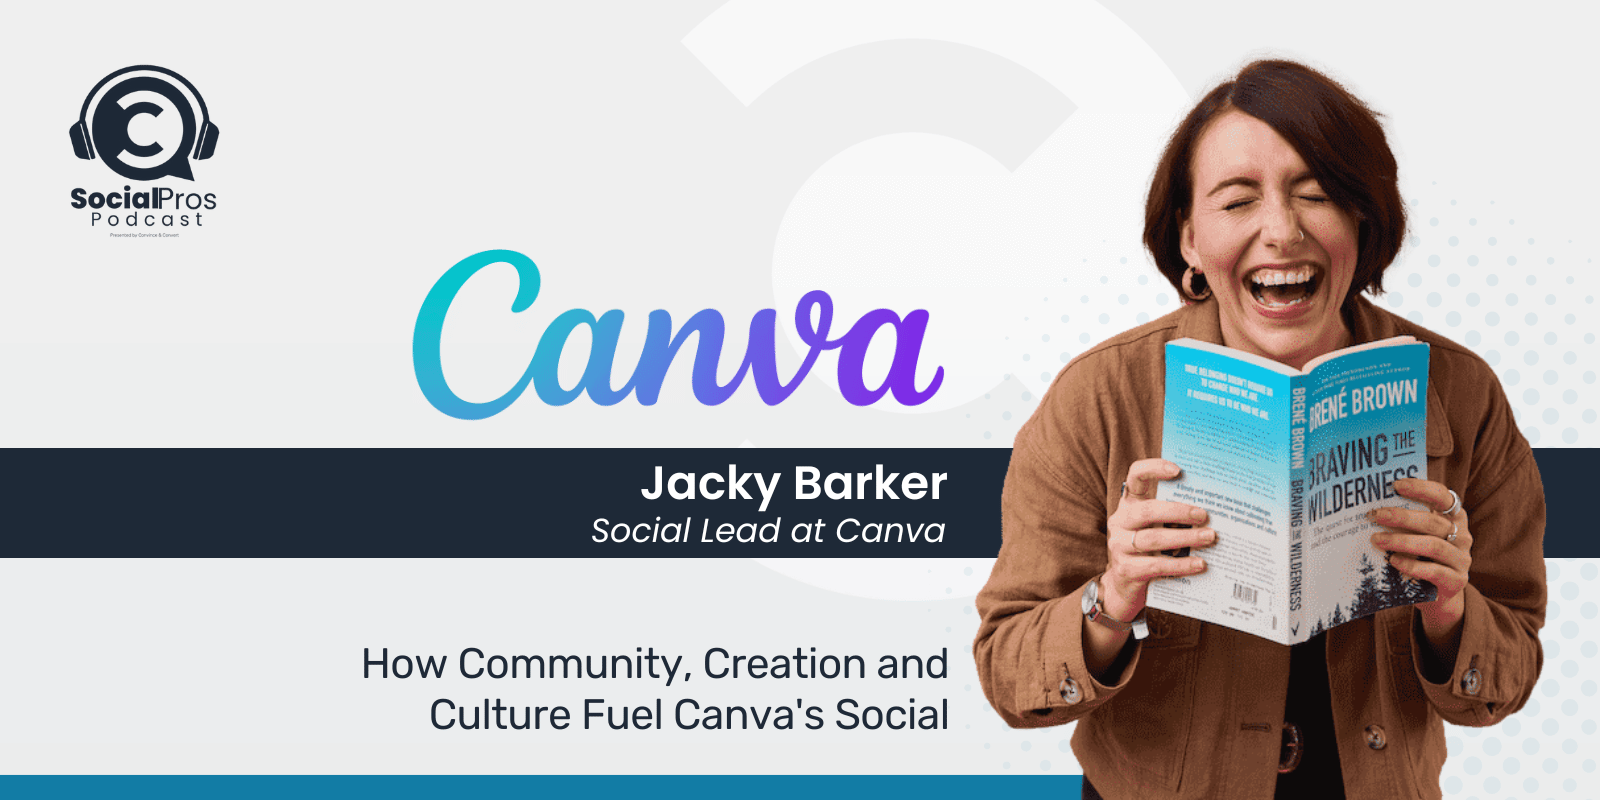 How Community, Creation and Culture Fuel Canva's Social